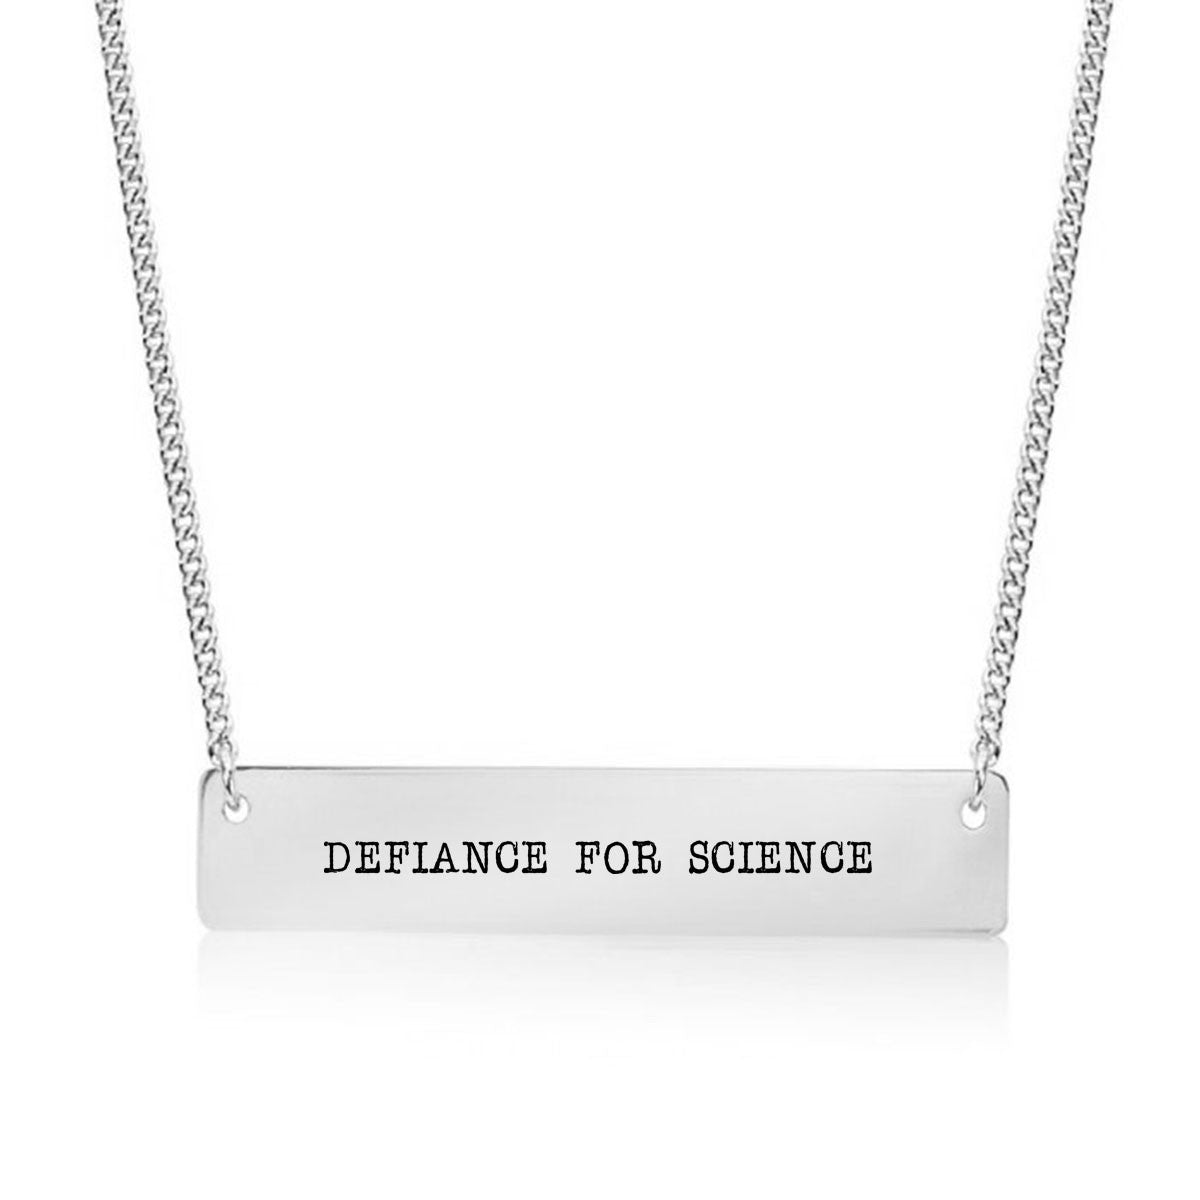 Defiance for Science Gold / Silver Bar Necklace - pipercleo.com